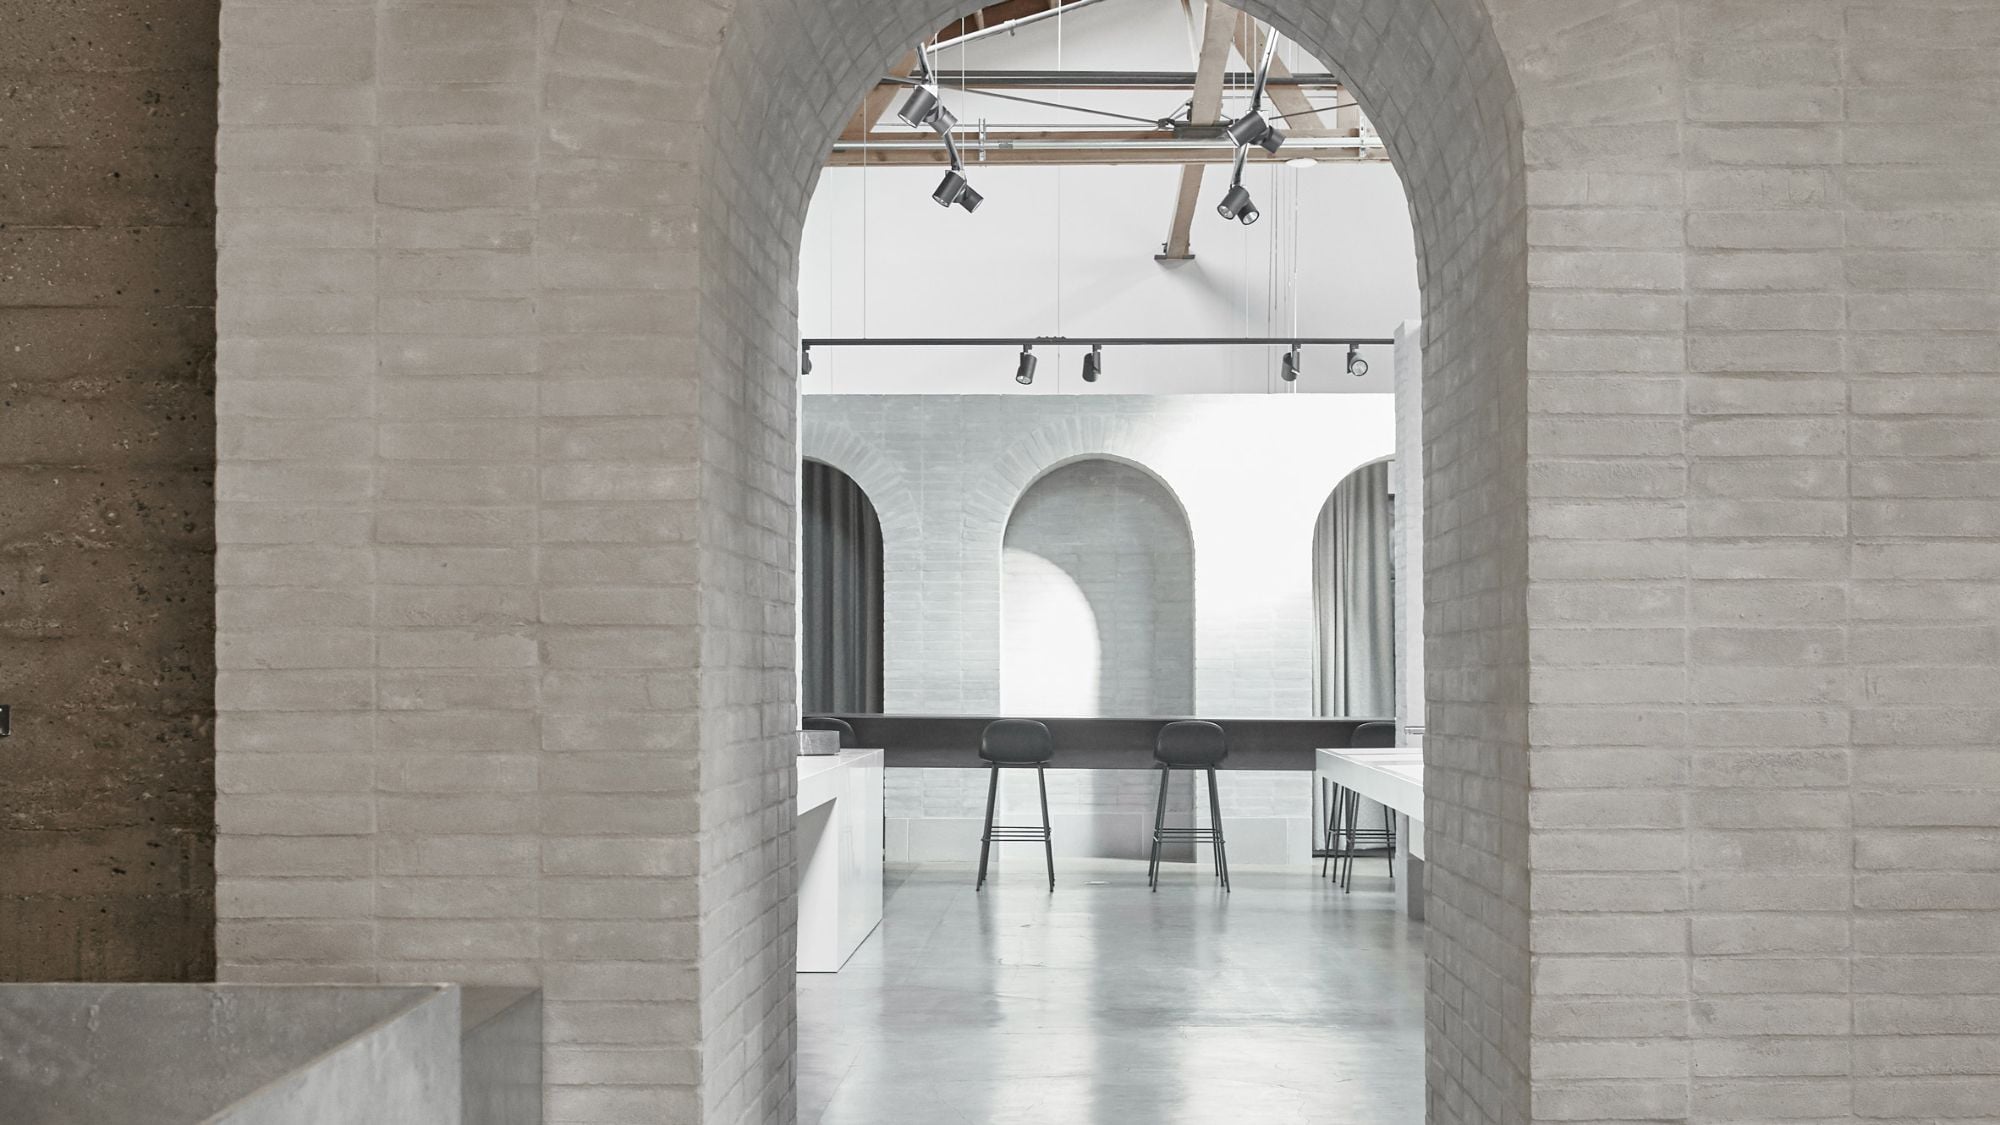 The Splash Lab's new Culver City Showroom makes extensive use of arches and marble for a distinctly church-like feel.